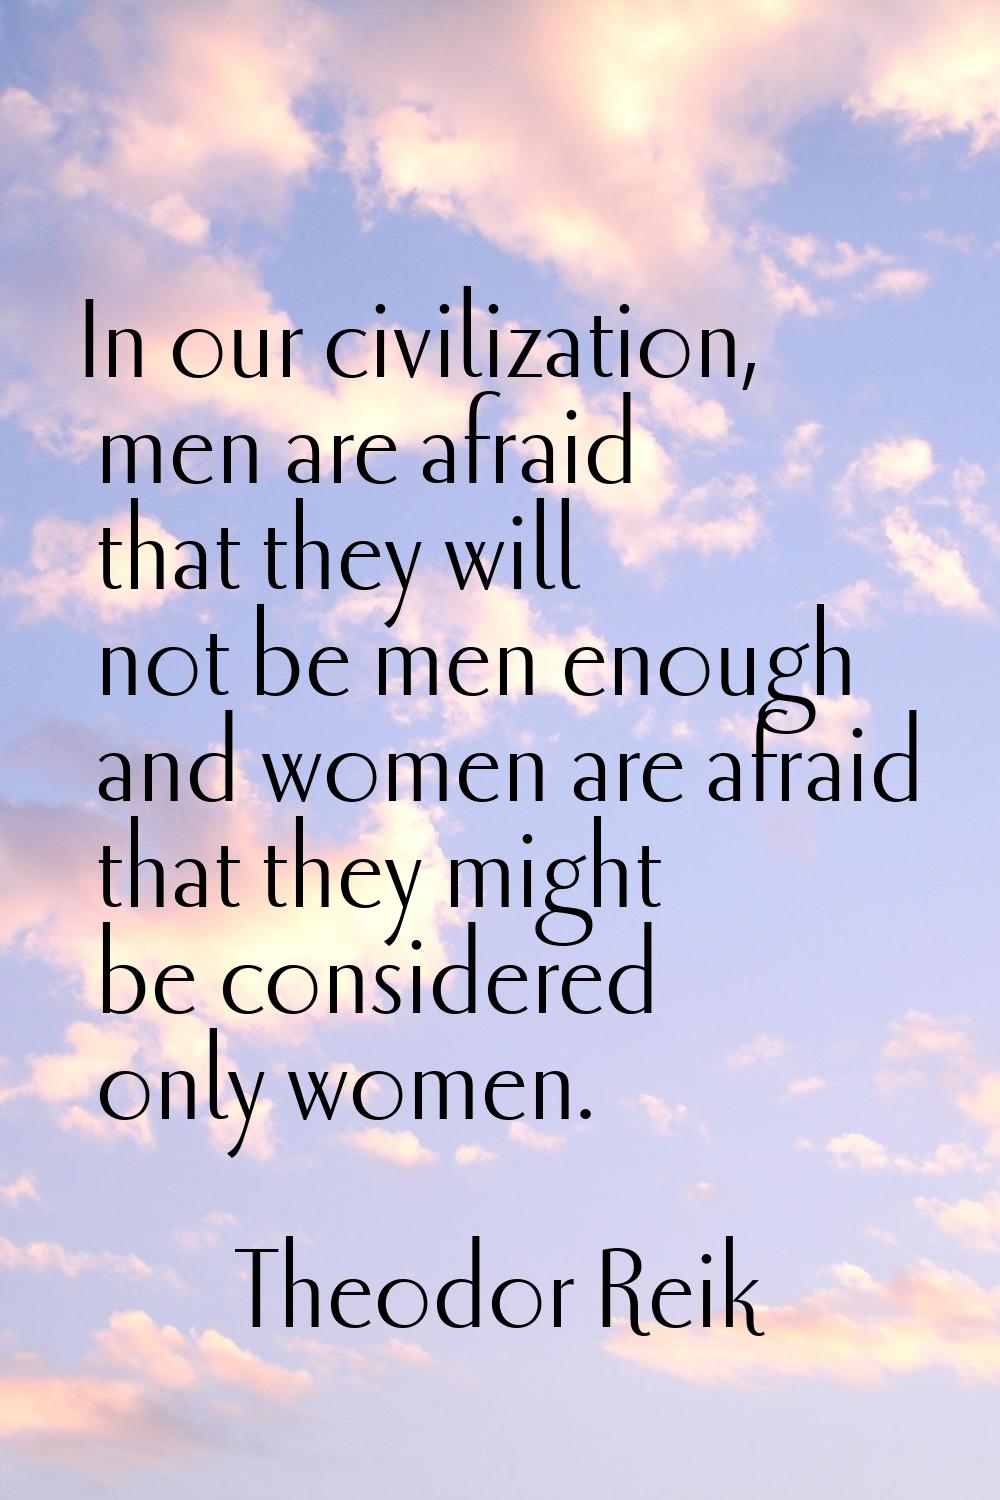 In our civilization, men are afraid that they will not be men enough and women are afraid that they